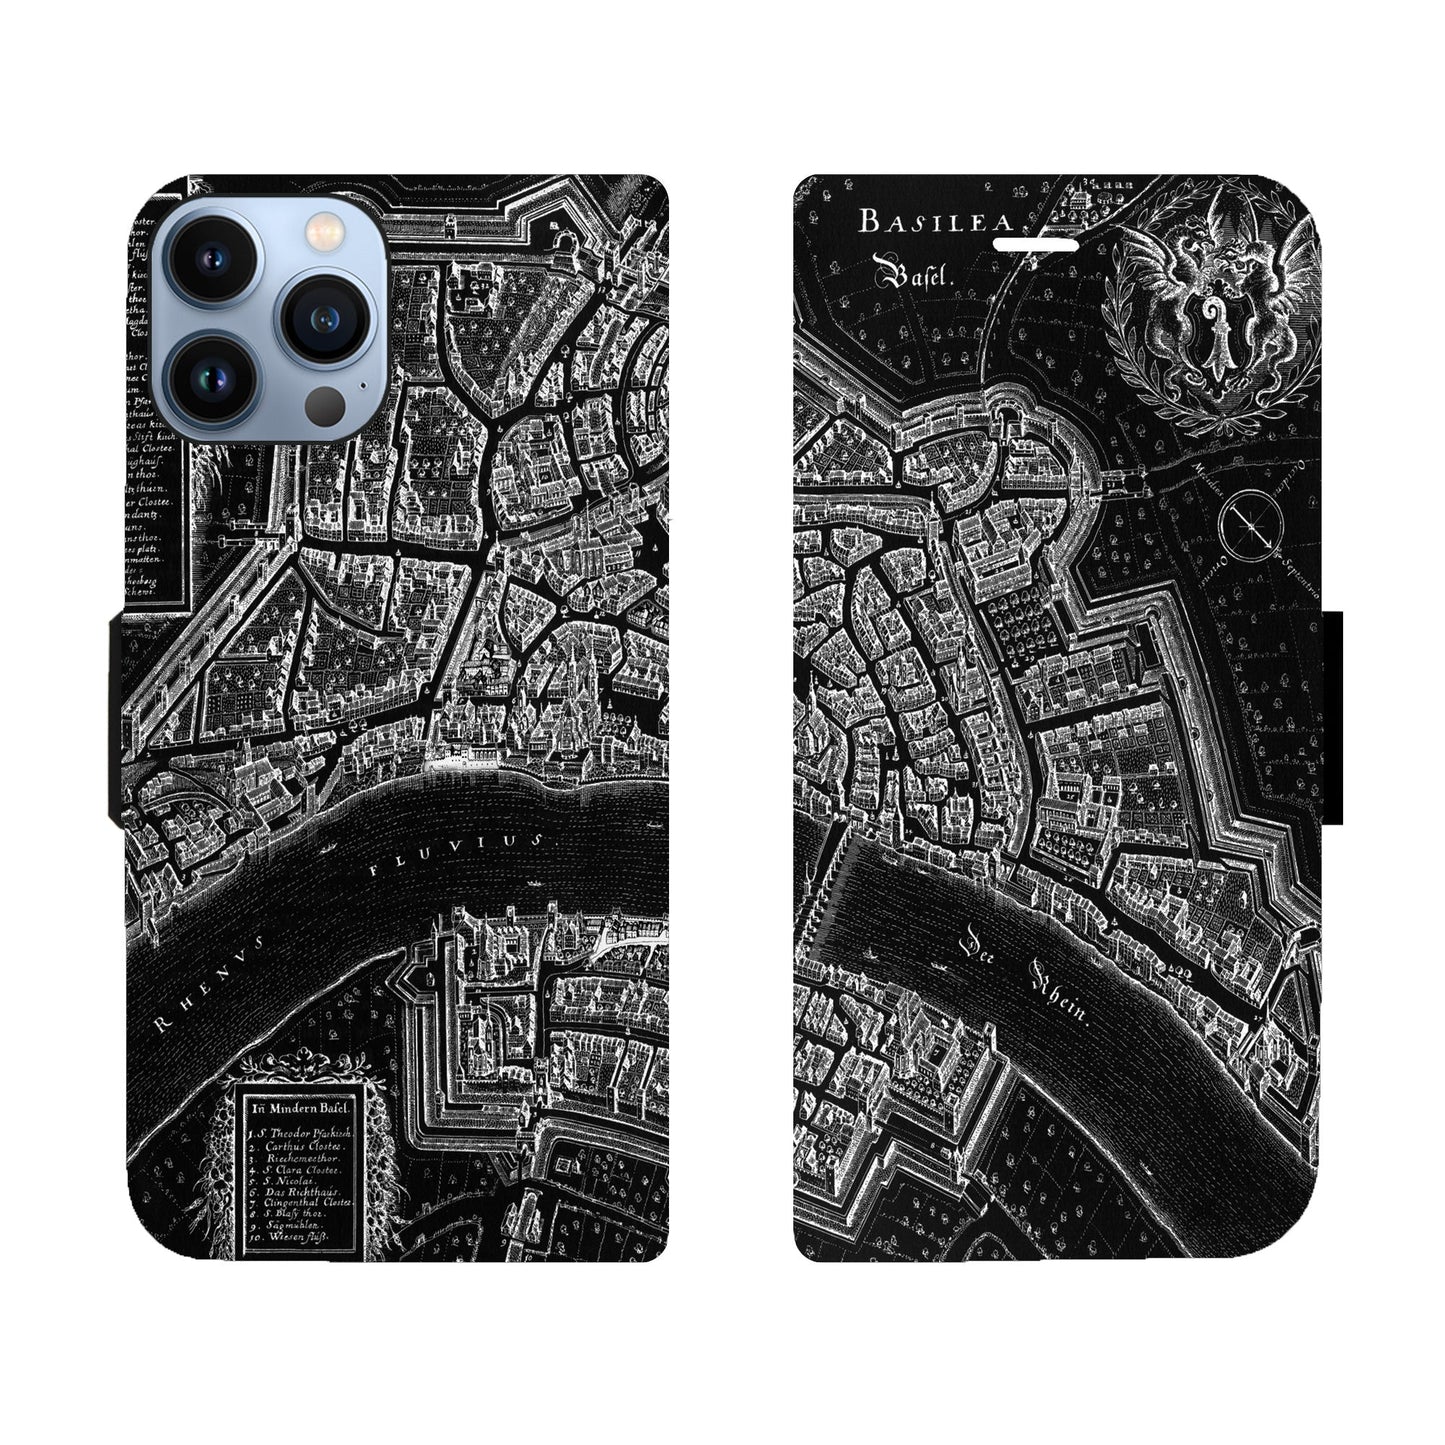 Basel Merian Negative Victor Case for iPhone, Samsung and Huawei